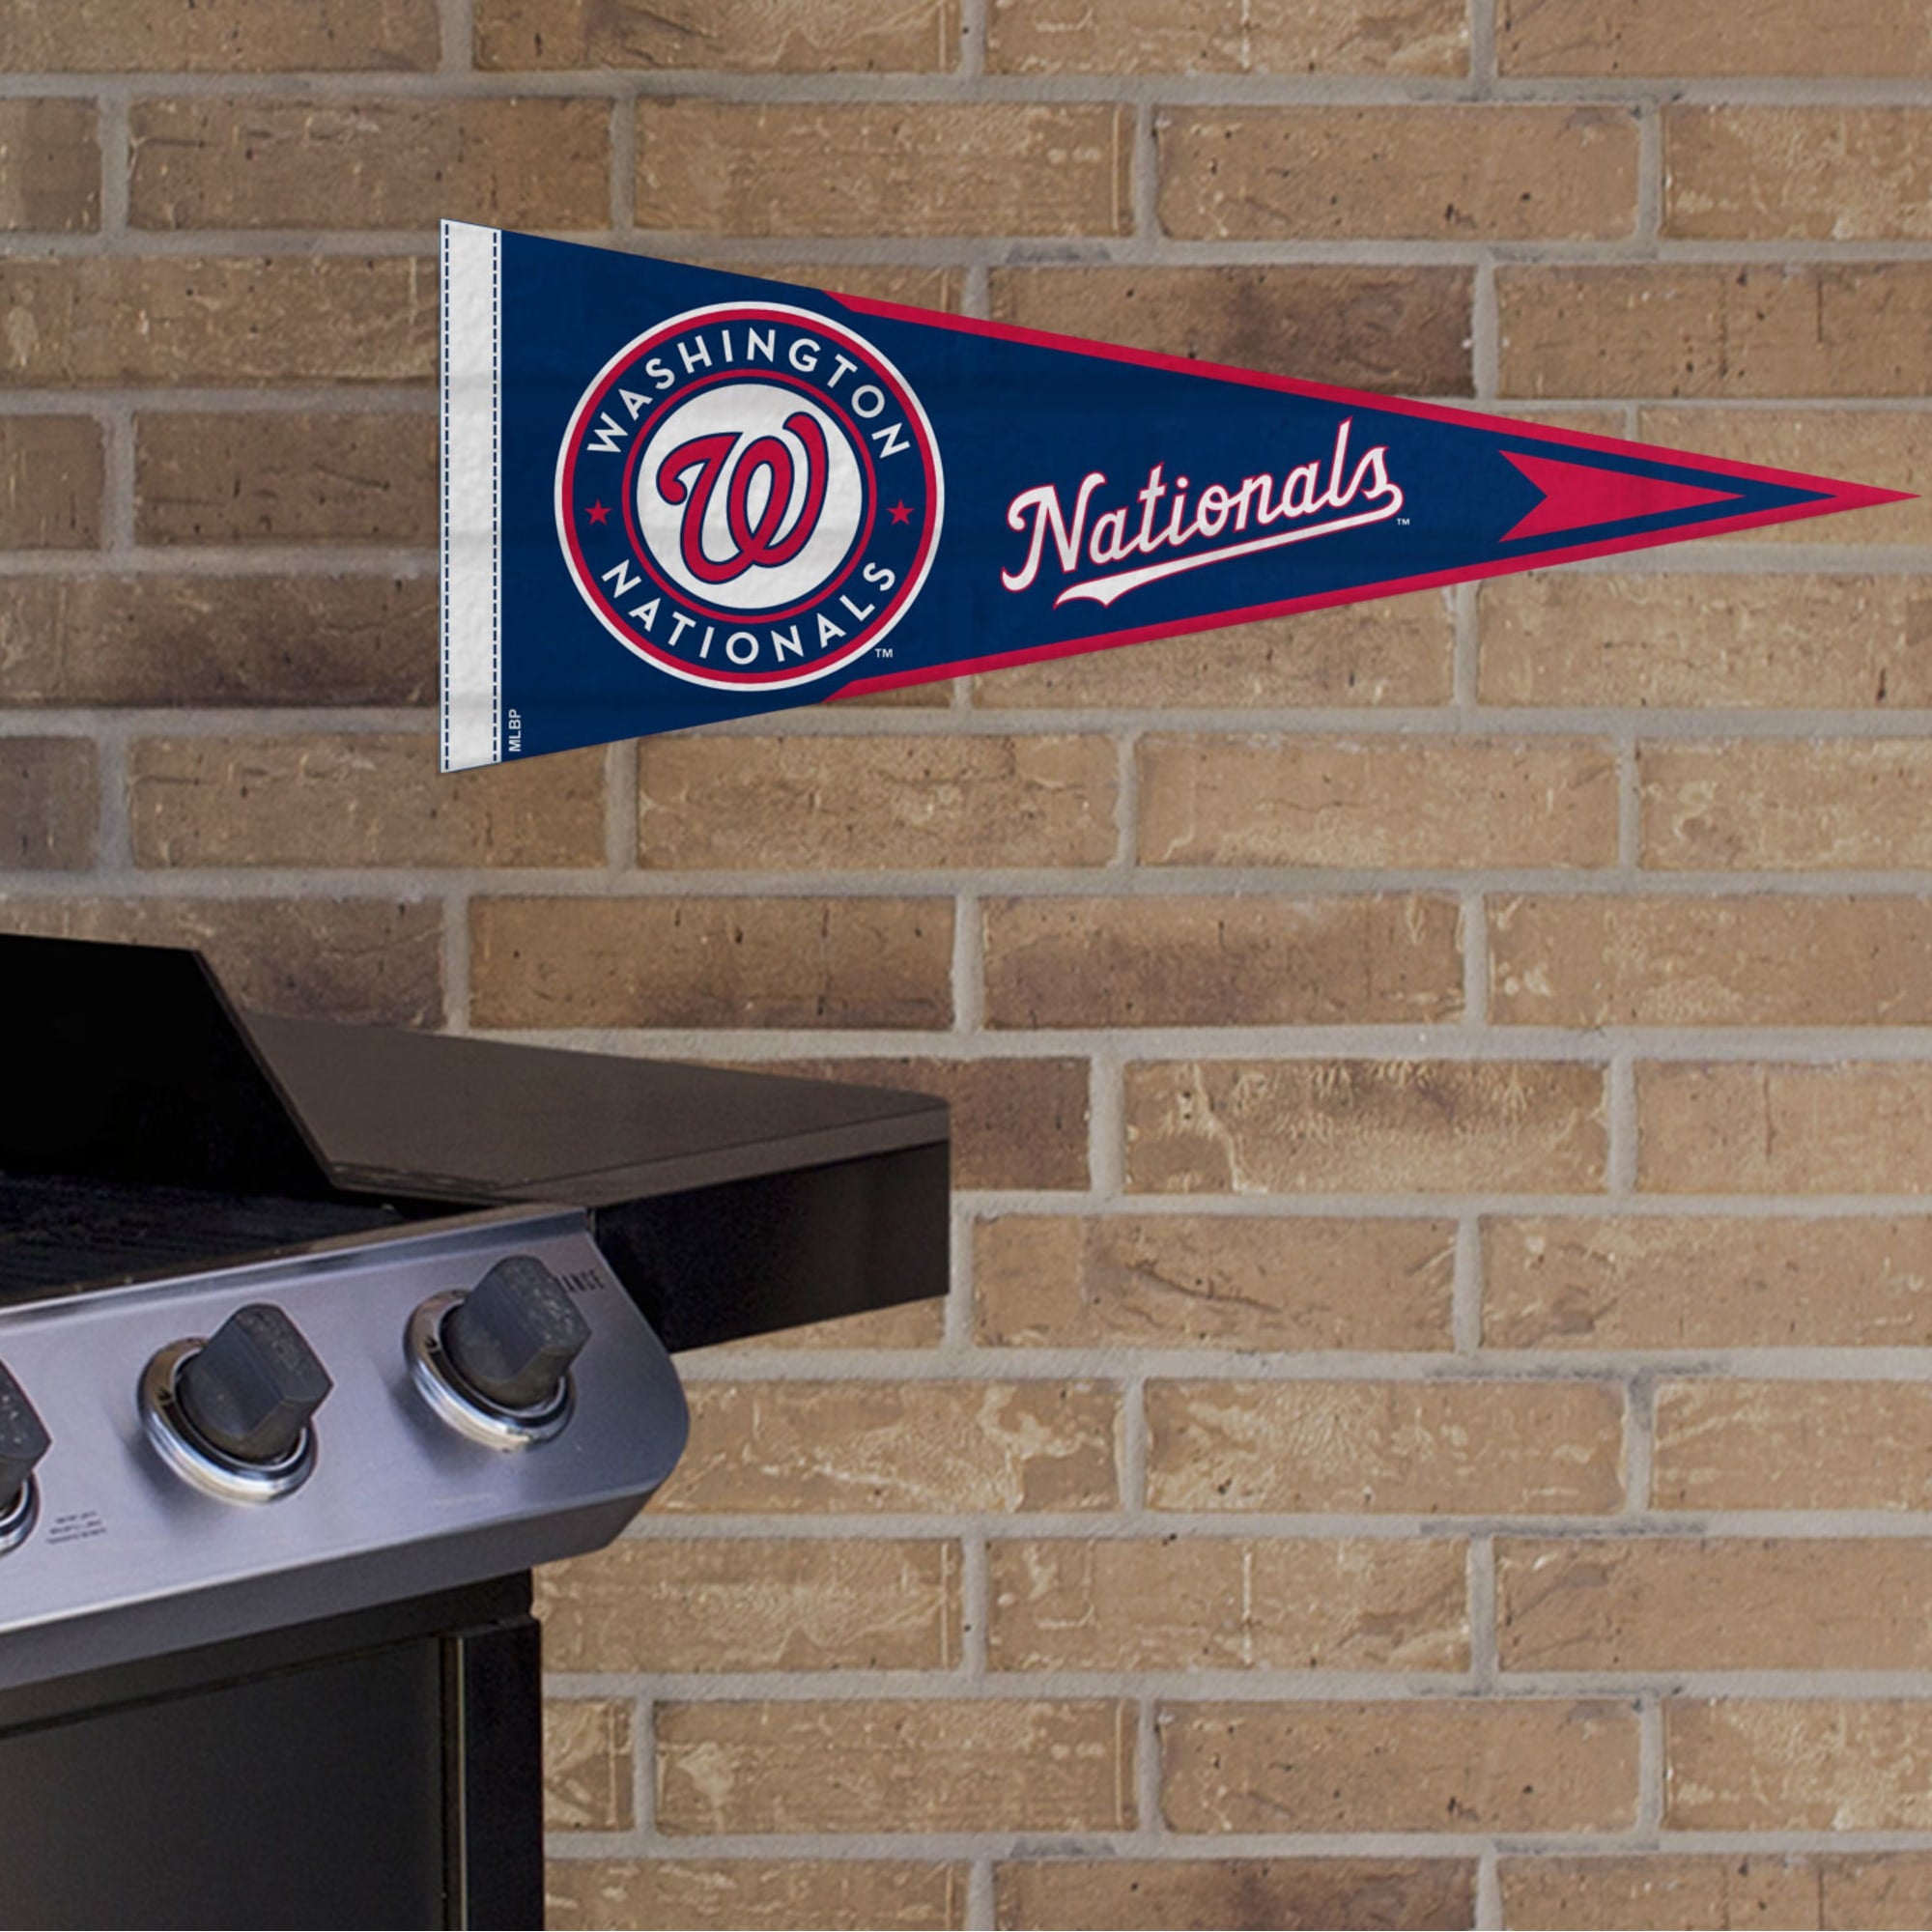 Washington Nationals: Pennant - Officially Licensed MLB Outdoor Graphic 24.0"W x 9.0"H by Fathead | Wood/Aluminum